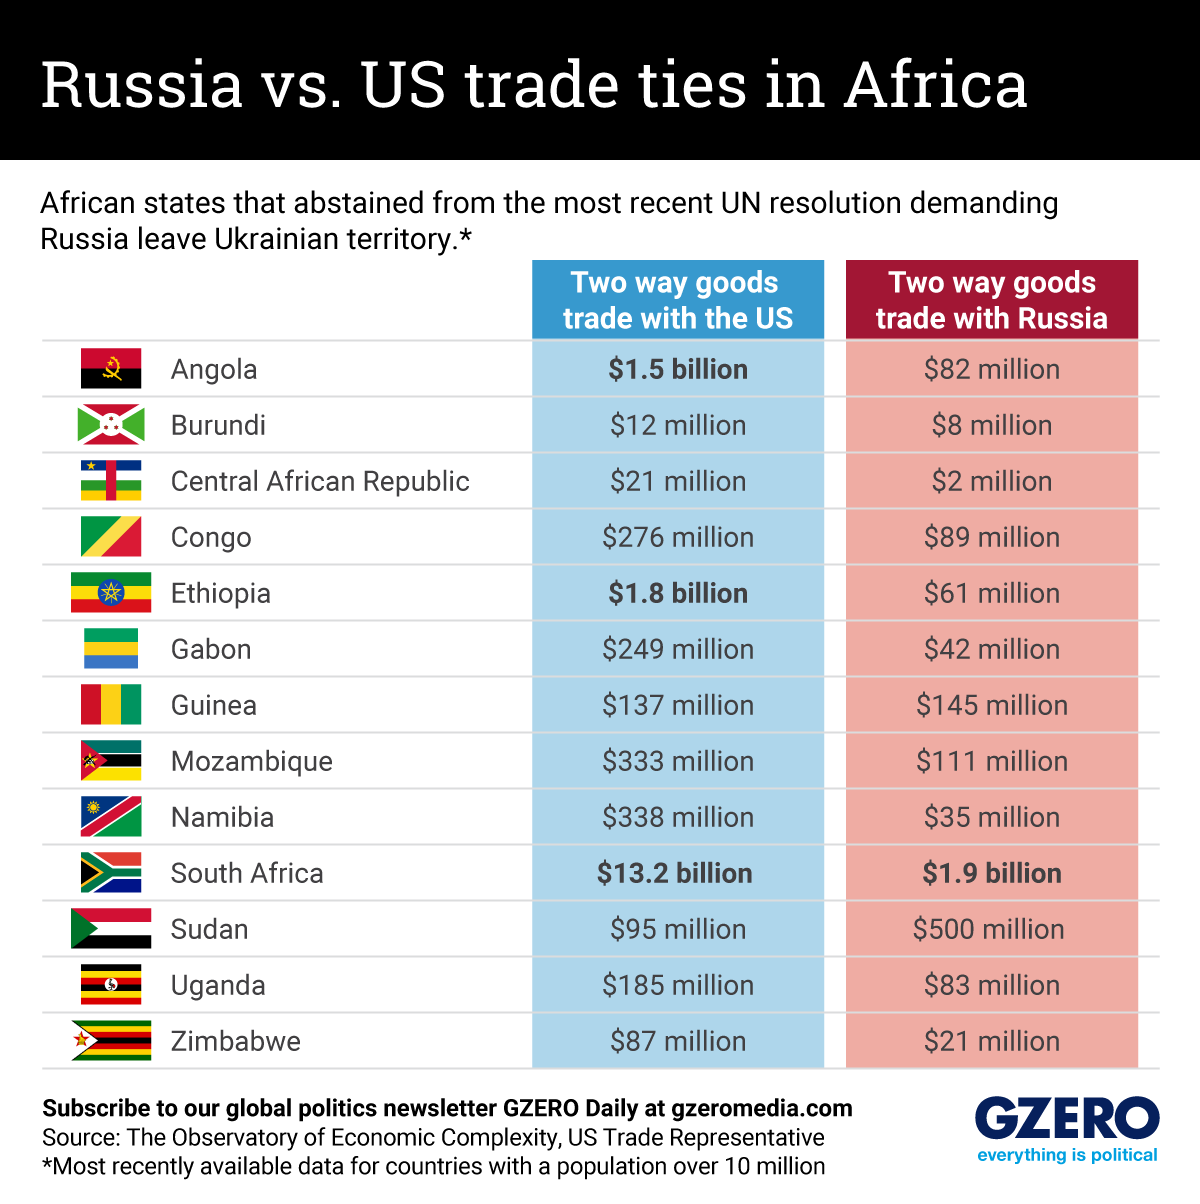 Bilateral trade with Russia compared to US by African countries that abstained in recent UN vote to condemn Ukraine war